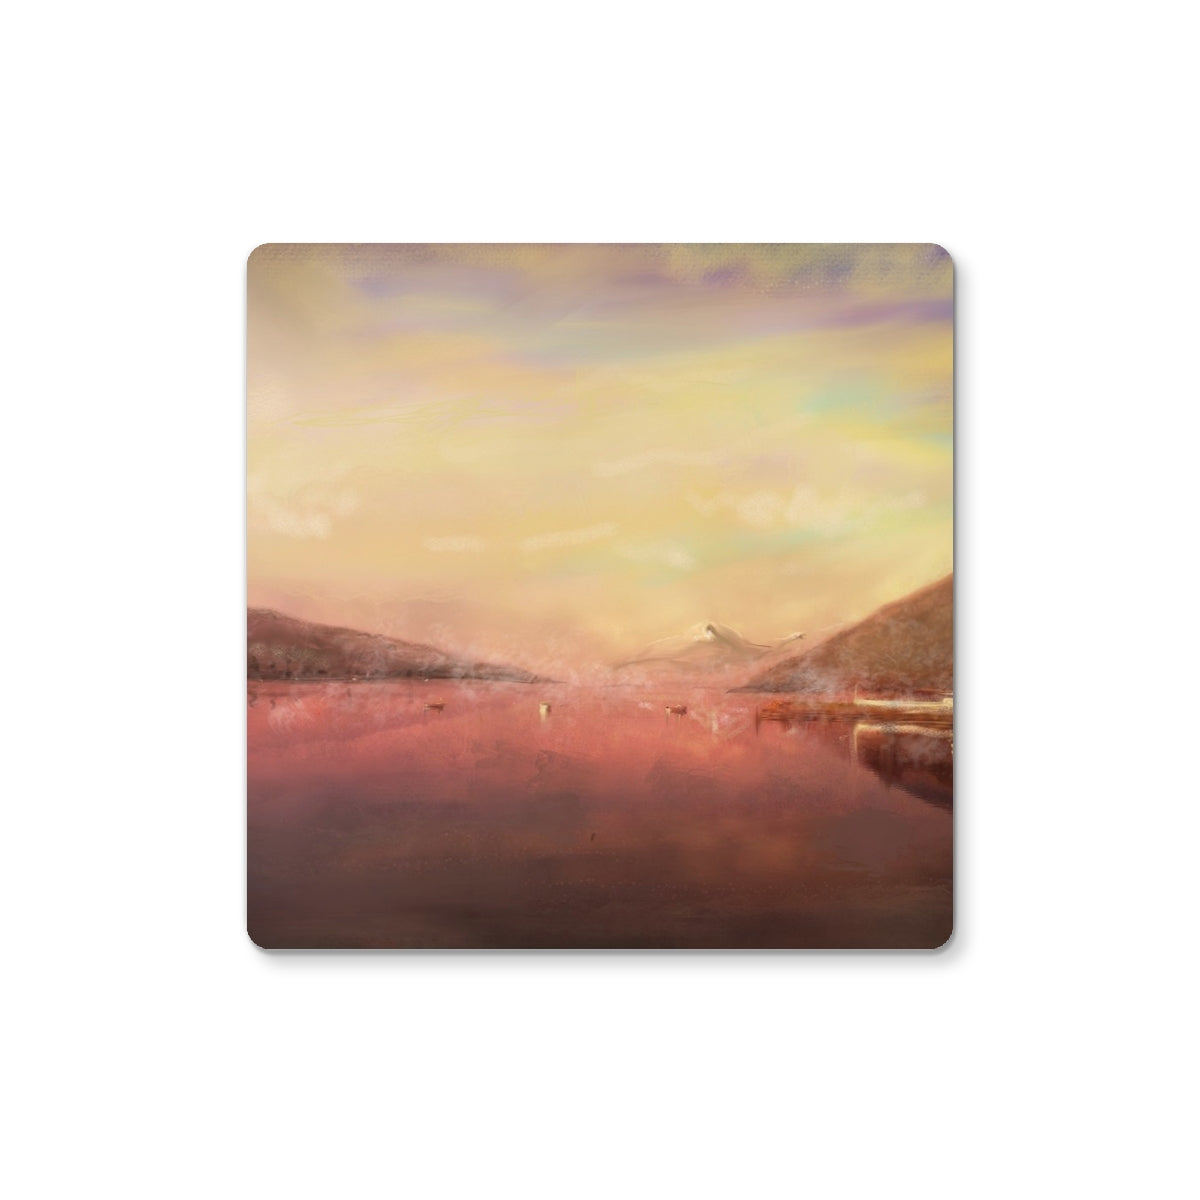 Loch Tay Art Gifts Coaster-Coasters-Scottish Lochs & Mountains Art Gallery-Single Coaster-Paintings, Prints, Homeware, Art Gifts From Scotland By Scottish Artist Kevin Hunter